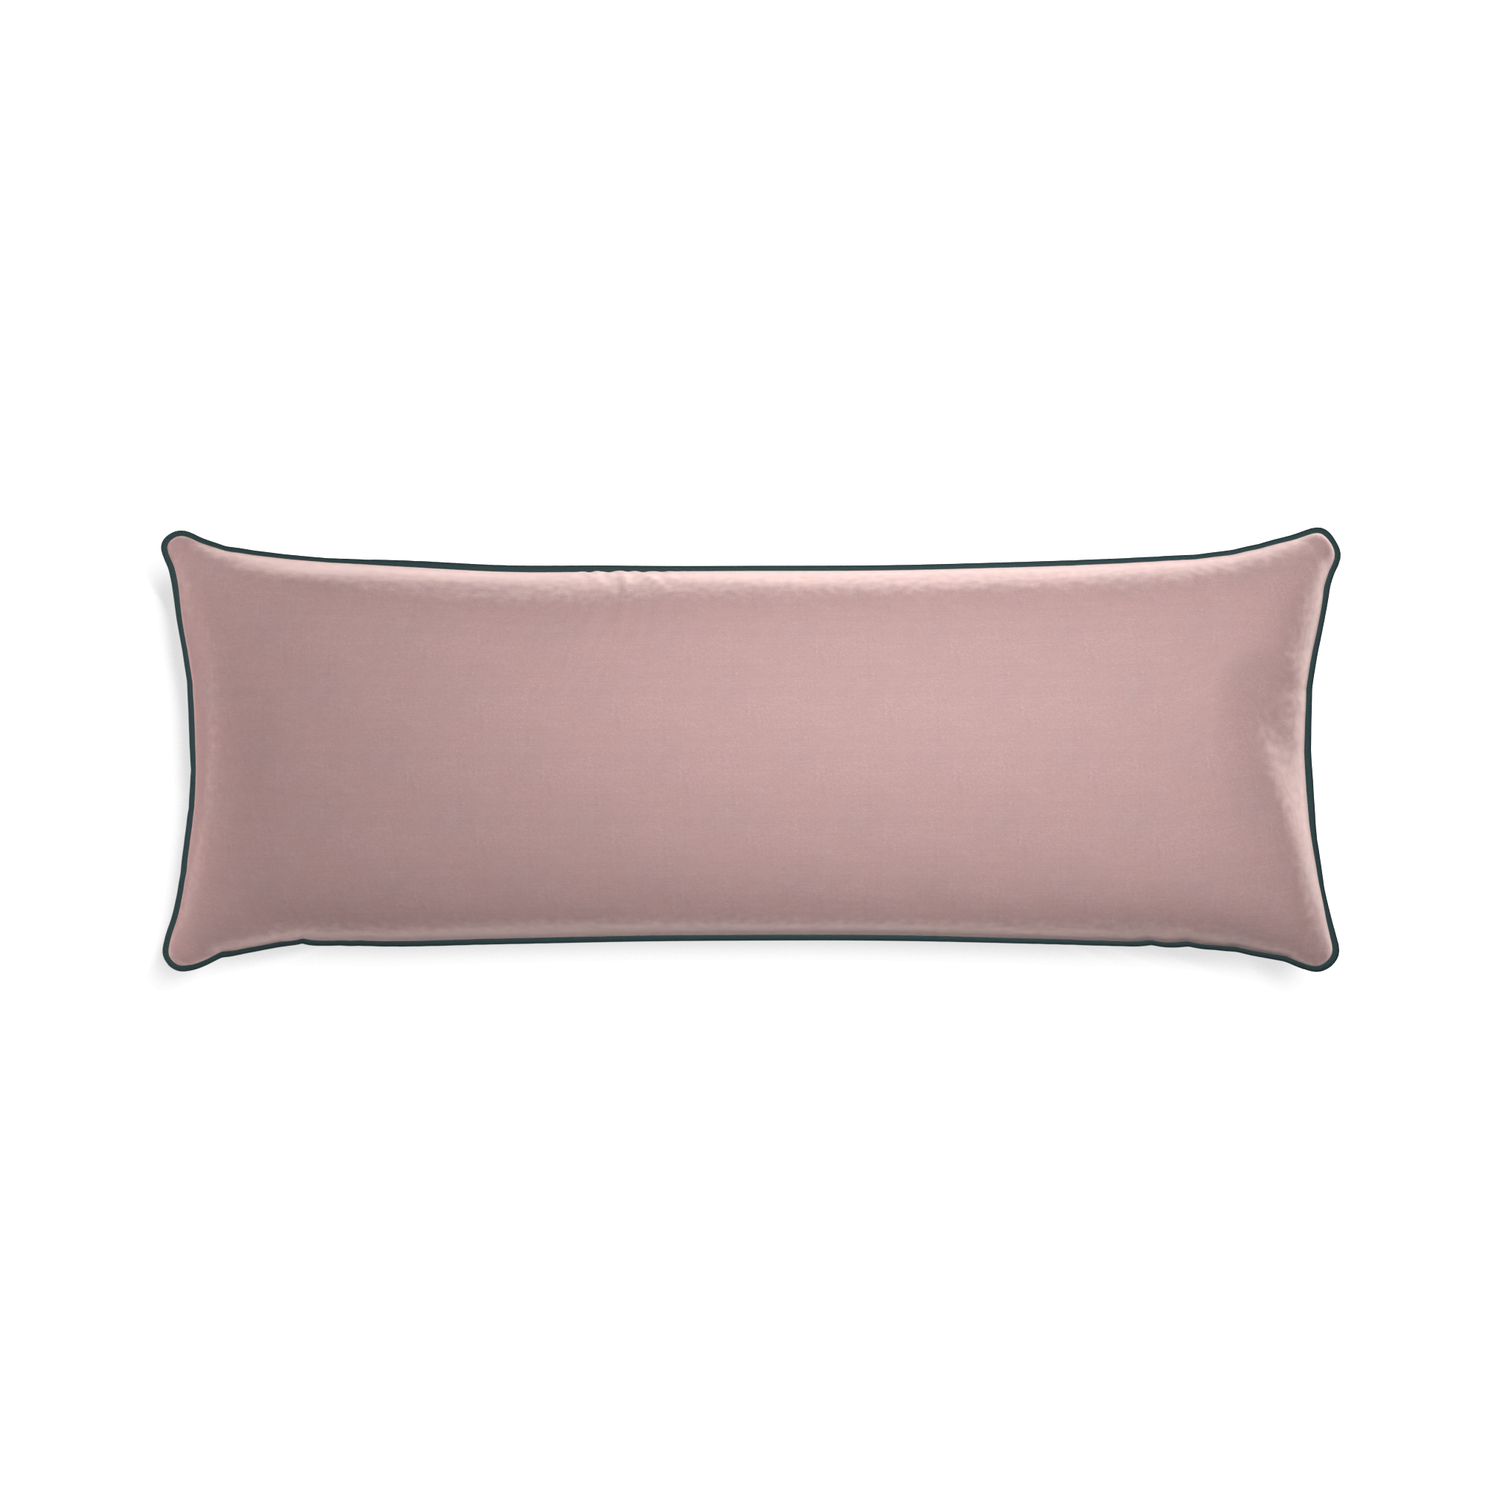 Xl-lumbar mauve velvet custom mauvepillow with p piping on white background